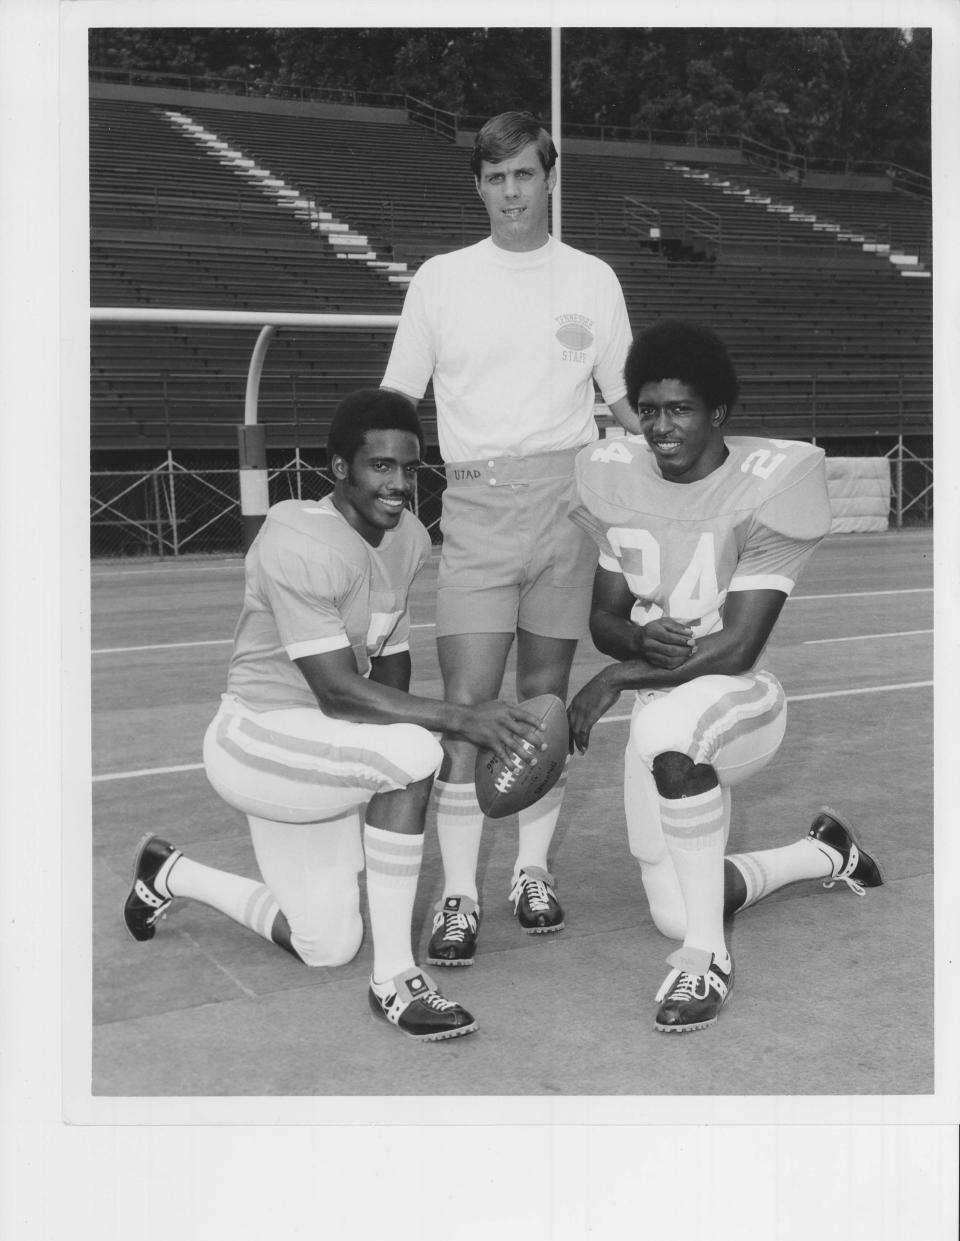 Tennessee coach Bill Battle poses with two of his stars, quarterback Condredge Holloway (7) and tailback Haskel Stanback (24).